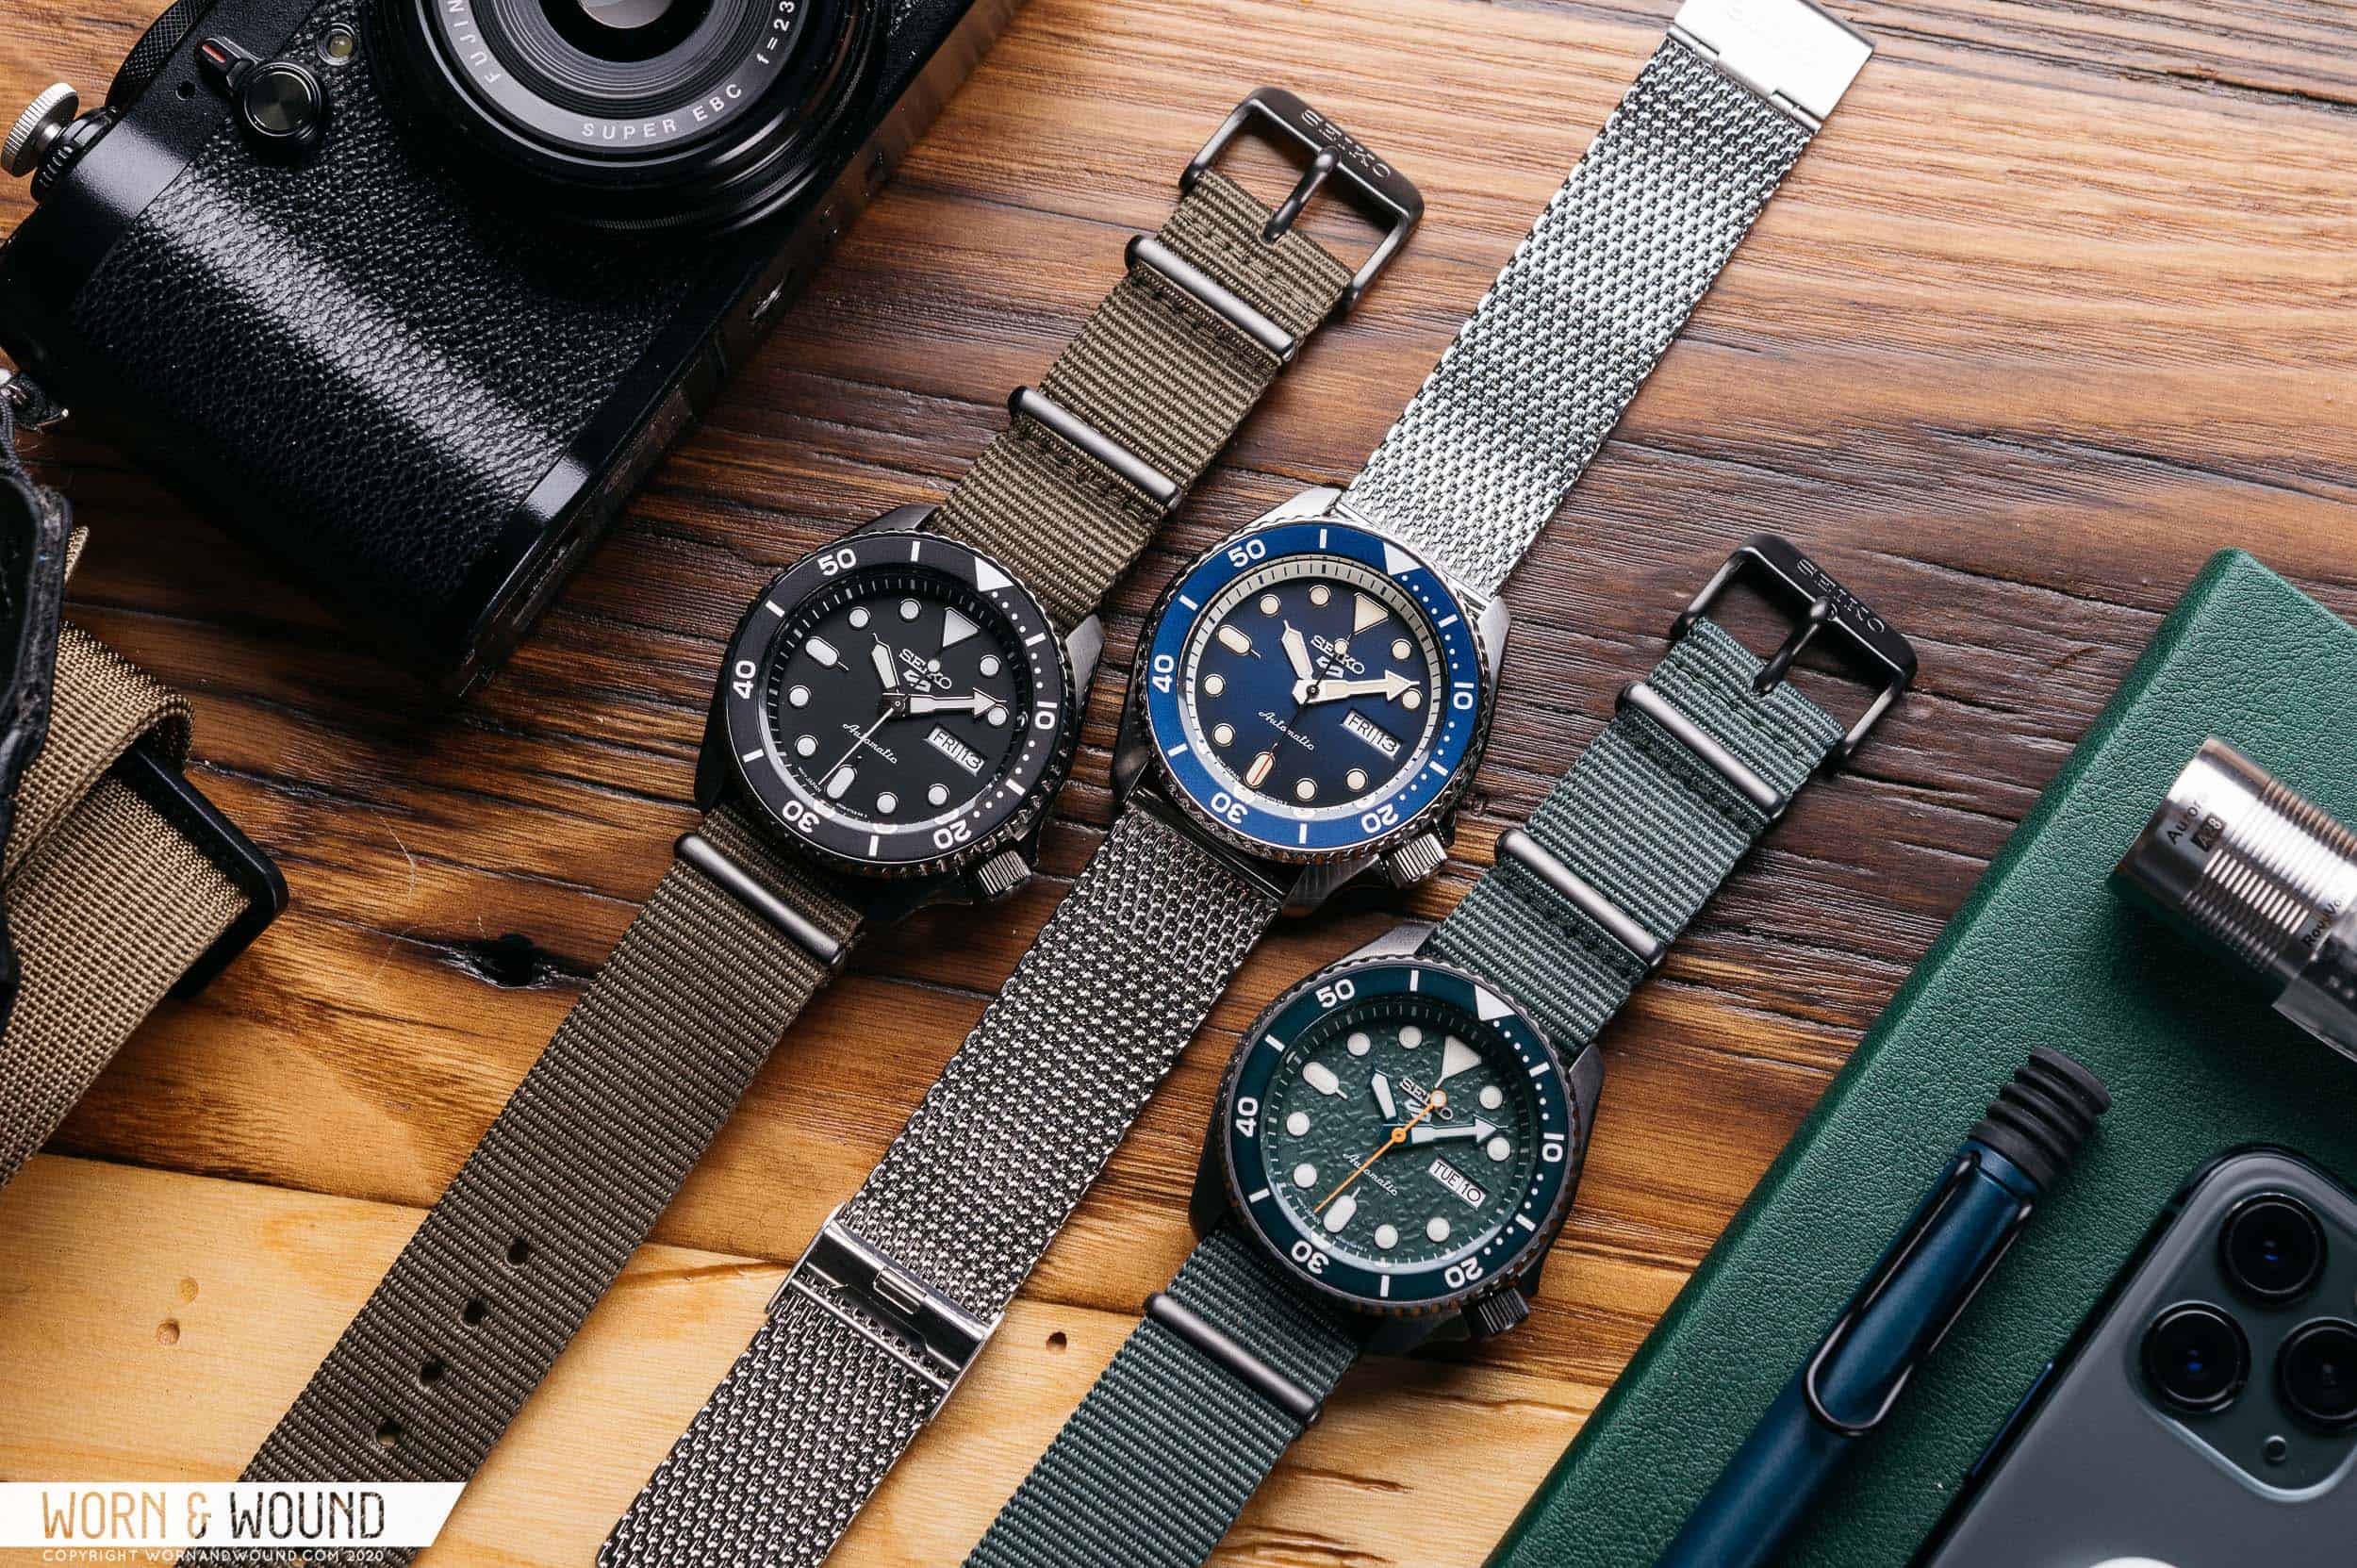 The Worn & Wound Podcast Ep. 124: March Recap - New Releases, Reviewing the  Seiko 5 Sports, and More - Worn & Wound